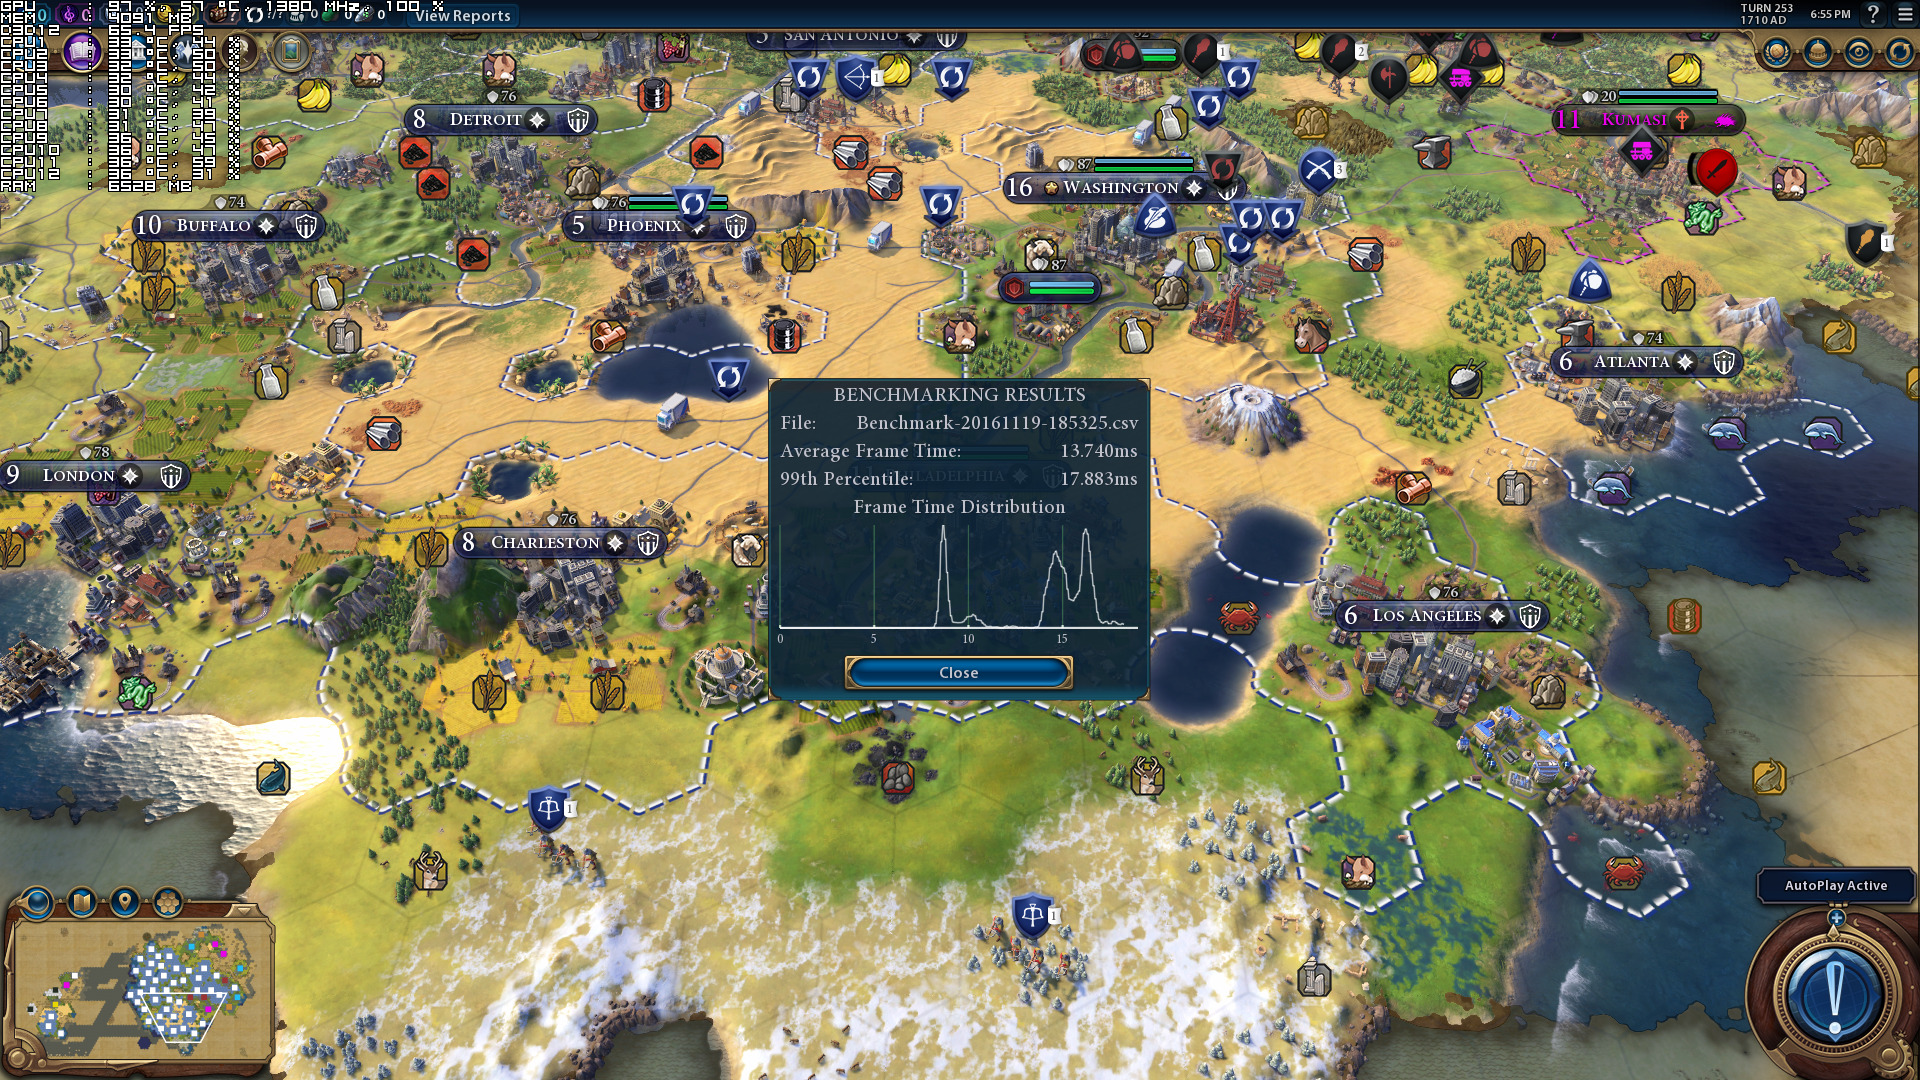 Which is better for Civ 6, Directx 11 or Directx 12?